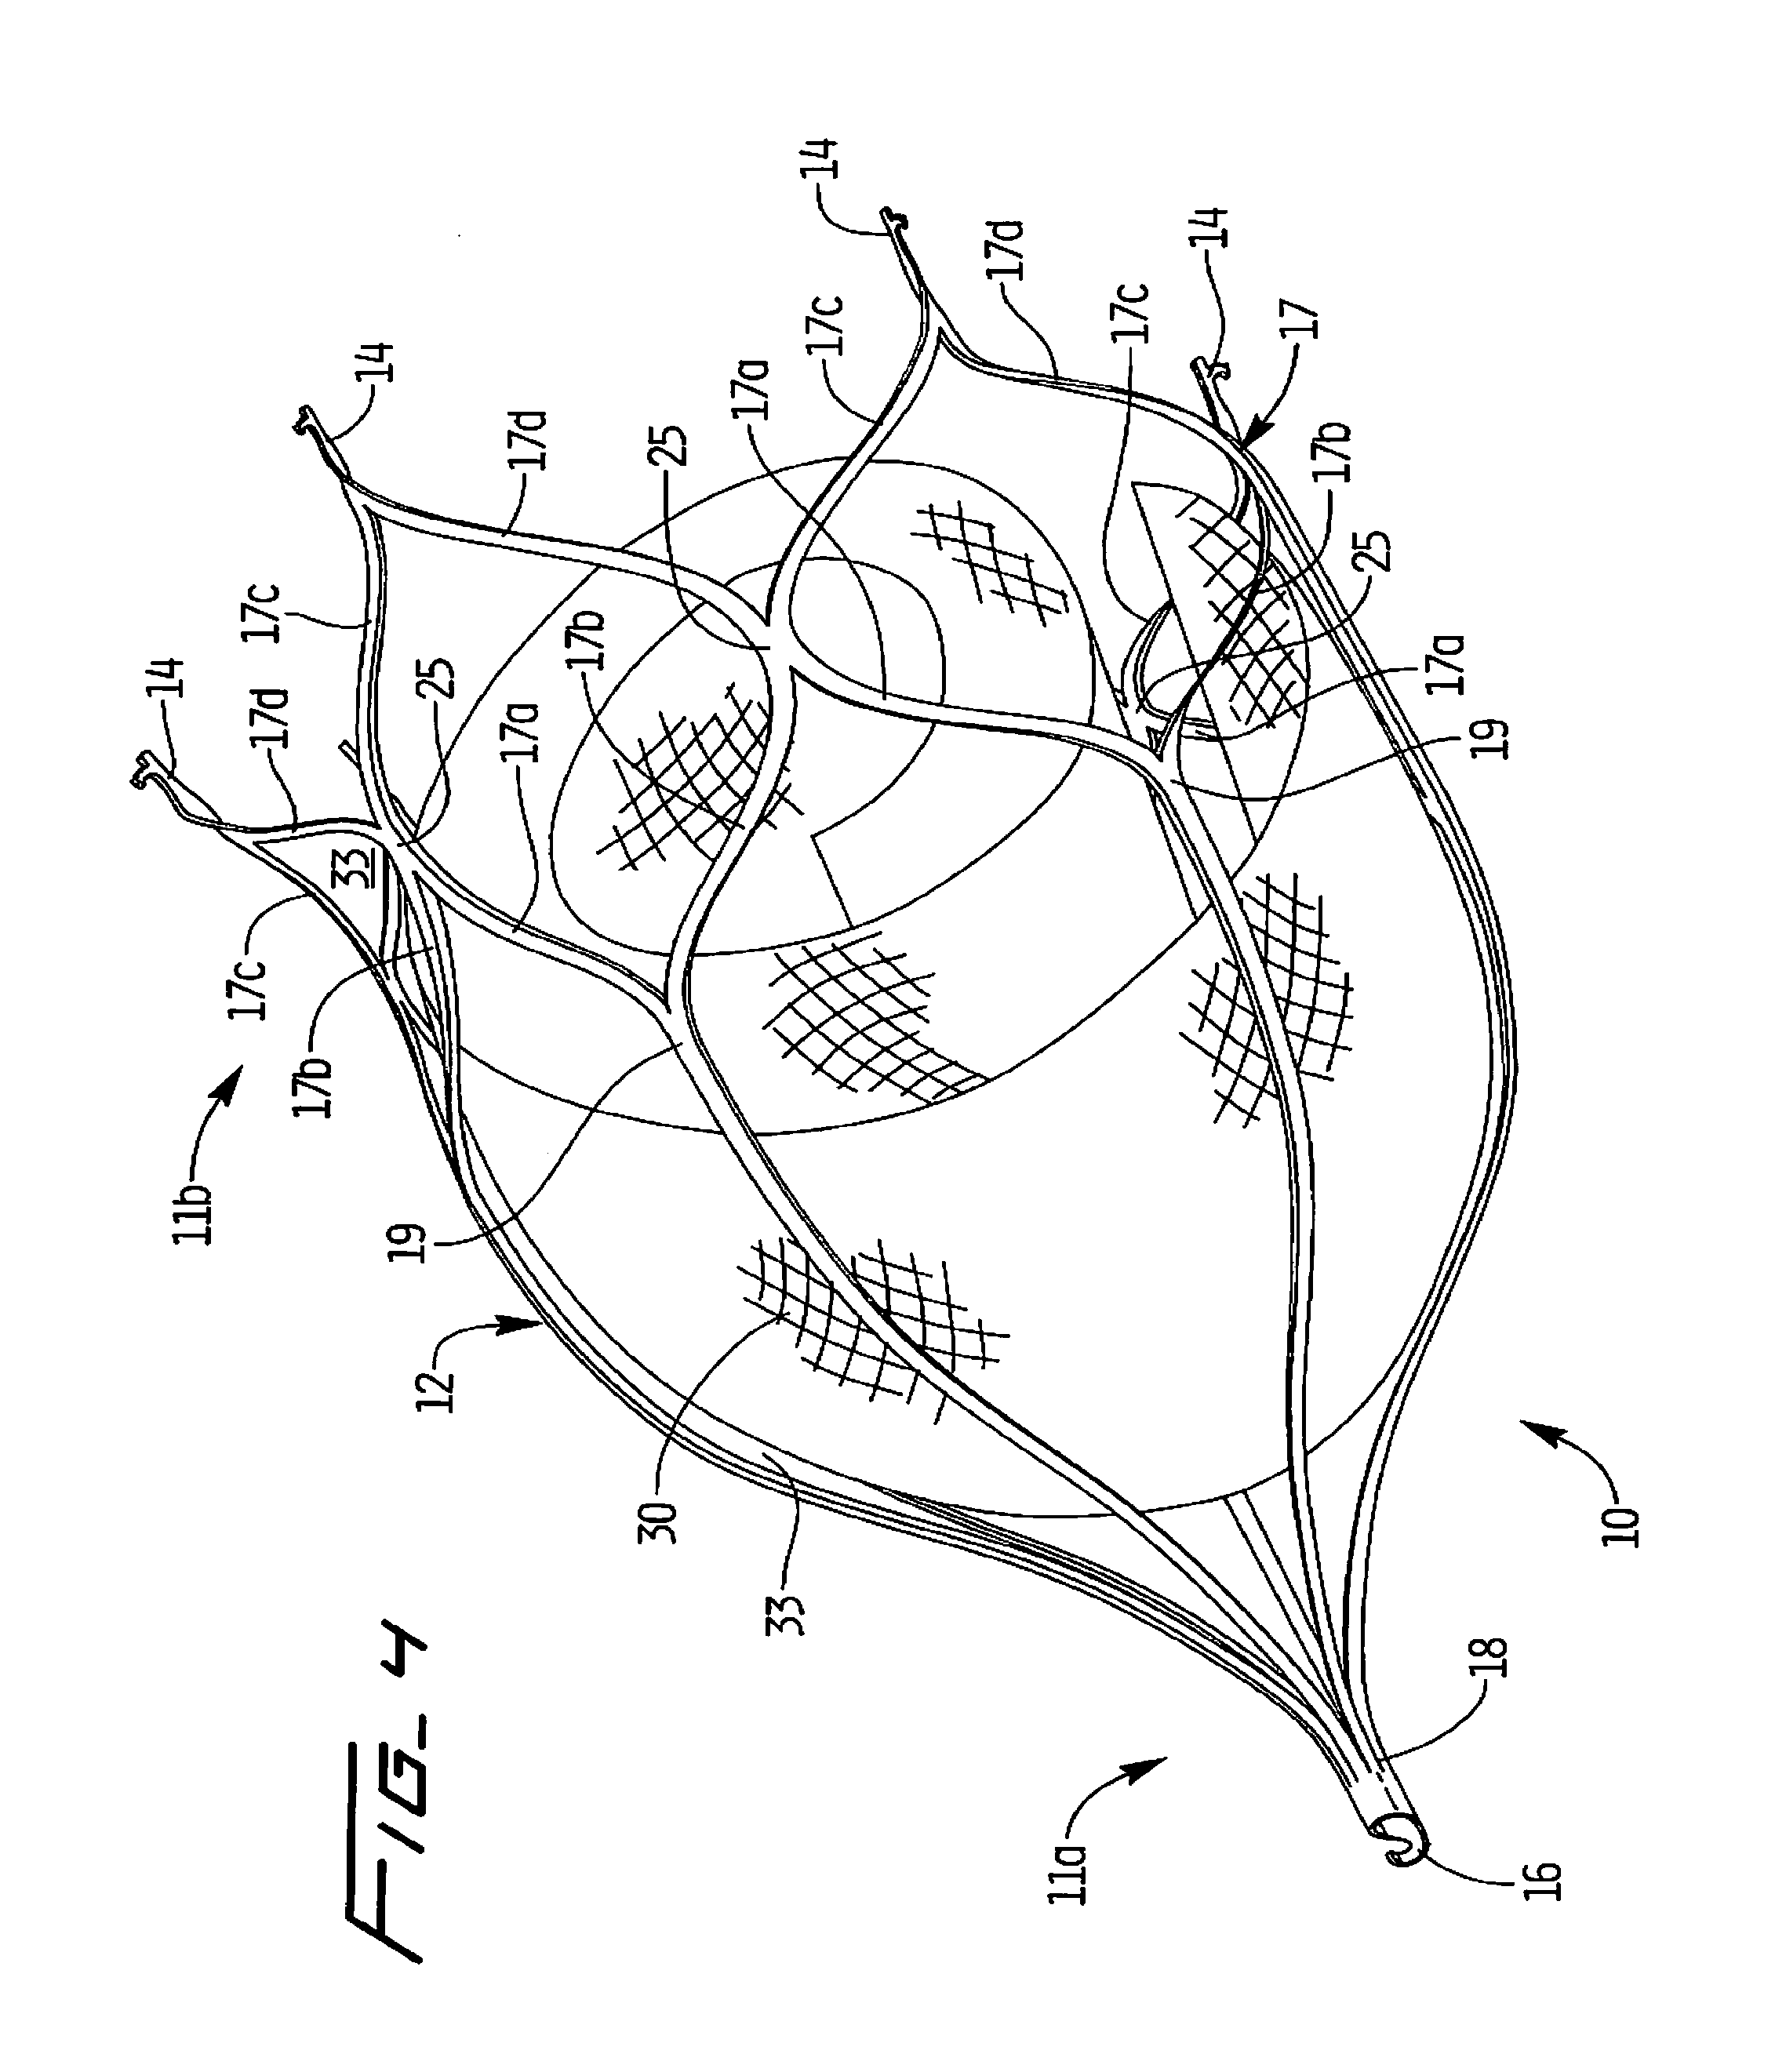 Device for preventing clot migraton from left atrial appendage